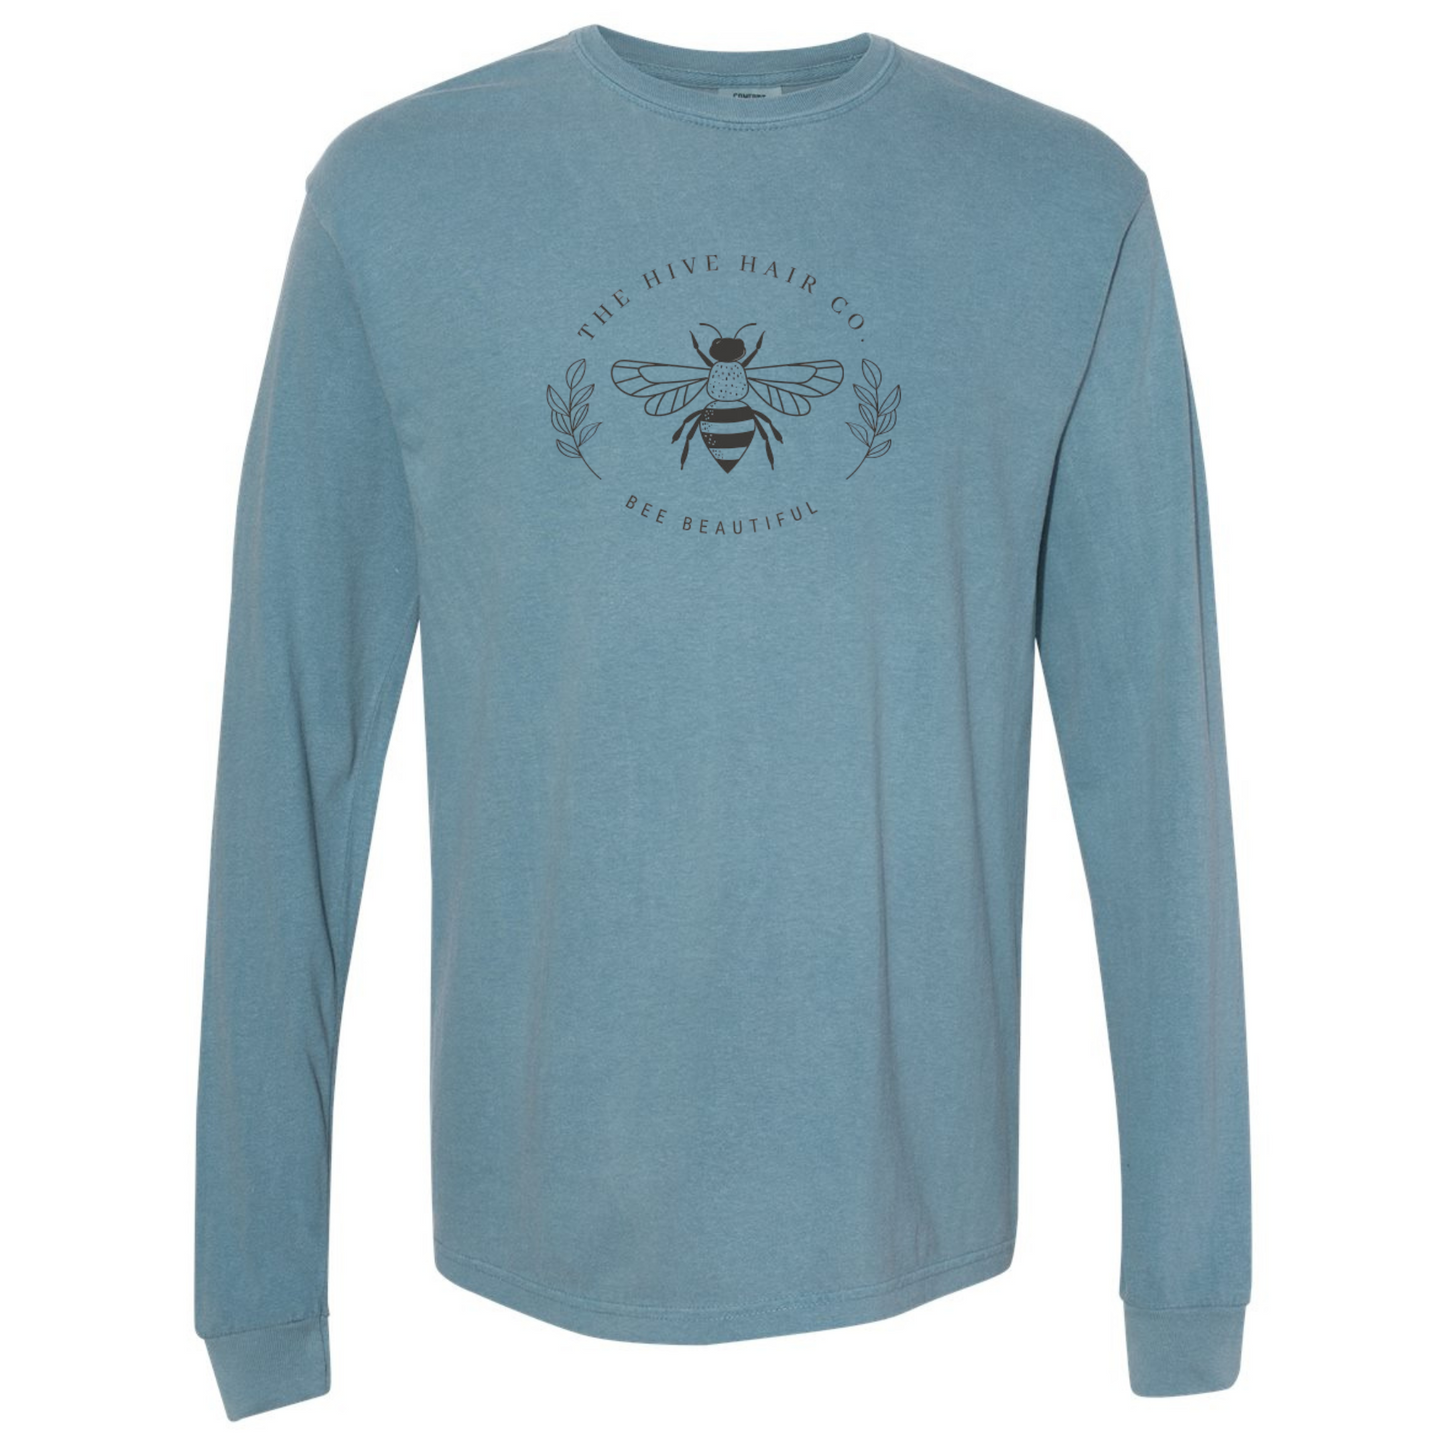 The Hive Hair Co. Long Sleeves